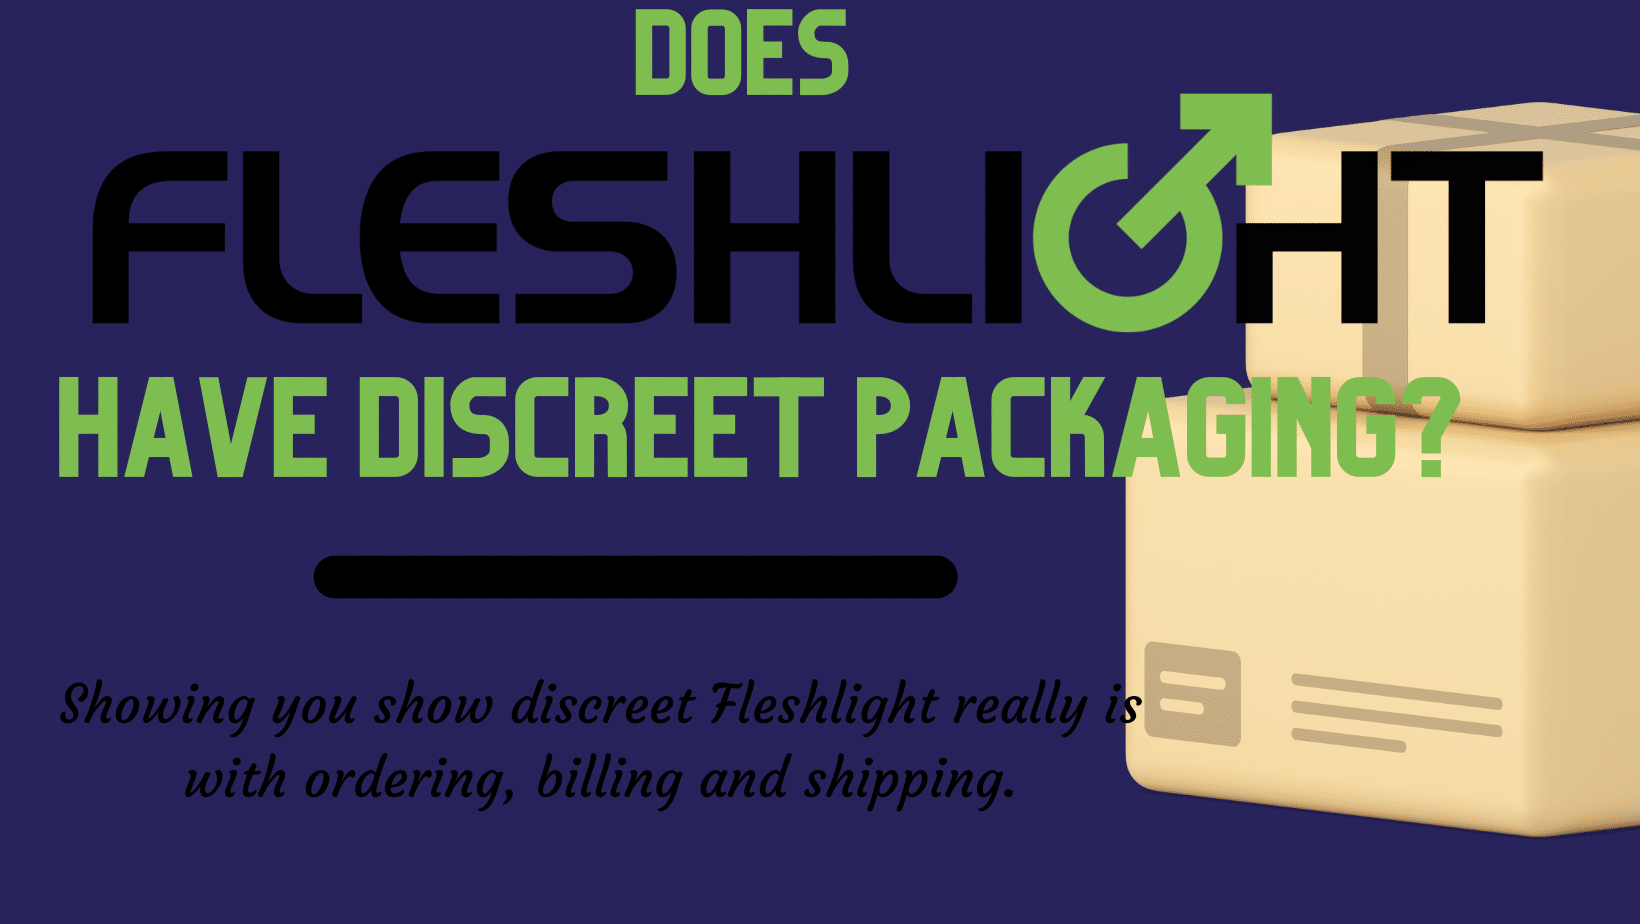 Does Fleshlight Have Discreet Packaging? I Bedbible.com